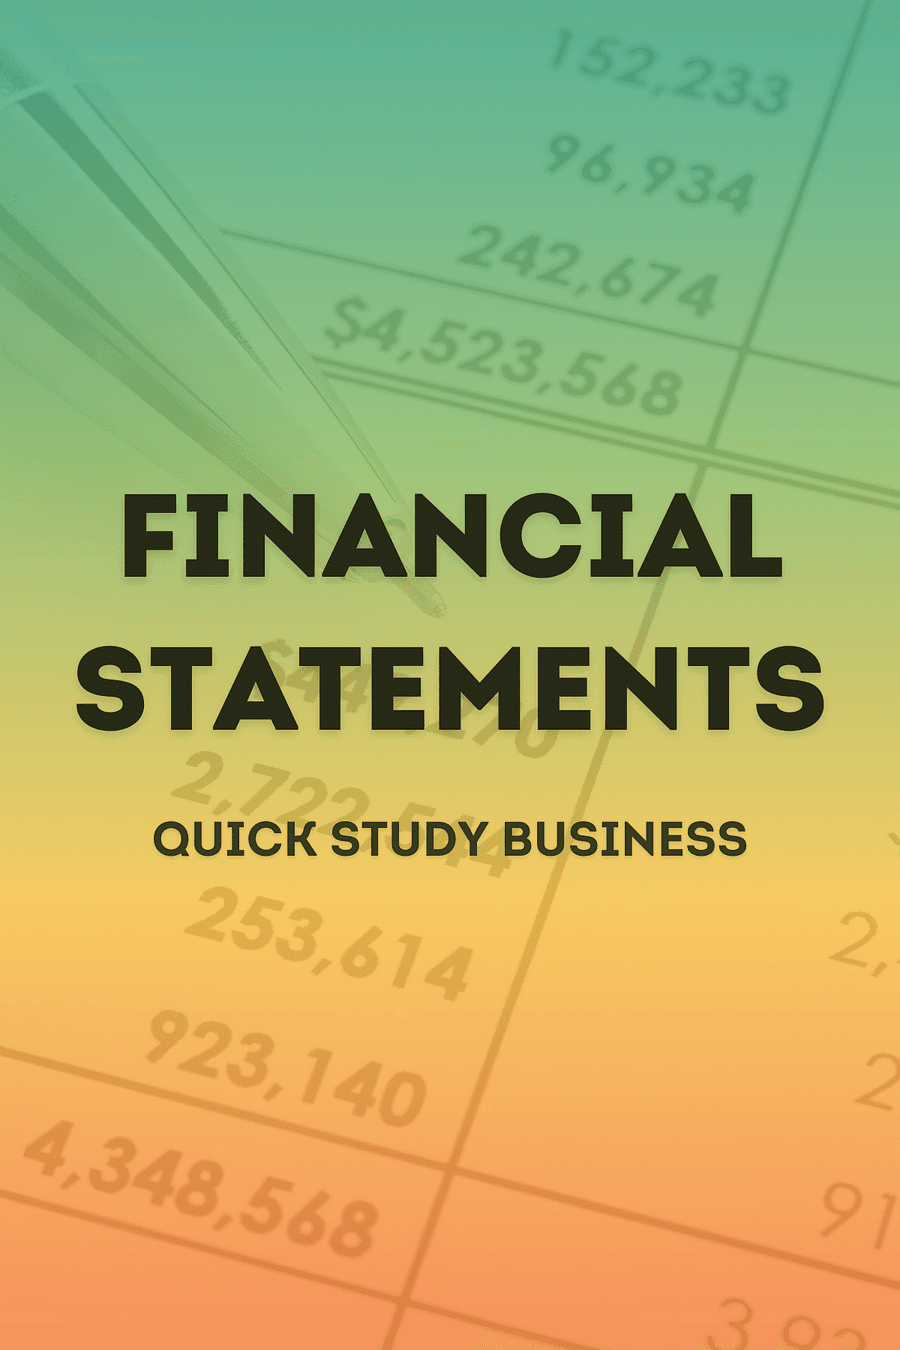 Financial Statements (Quick Study Business) by Inc. BarCharts - Book Summary